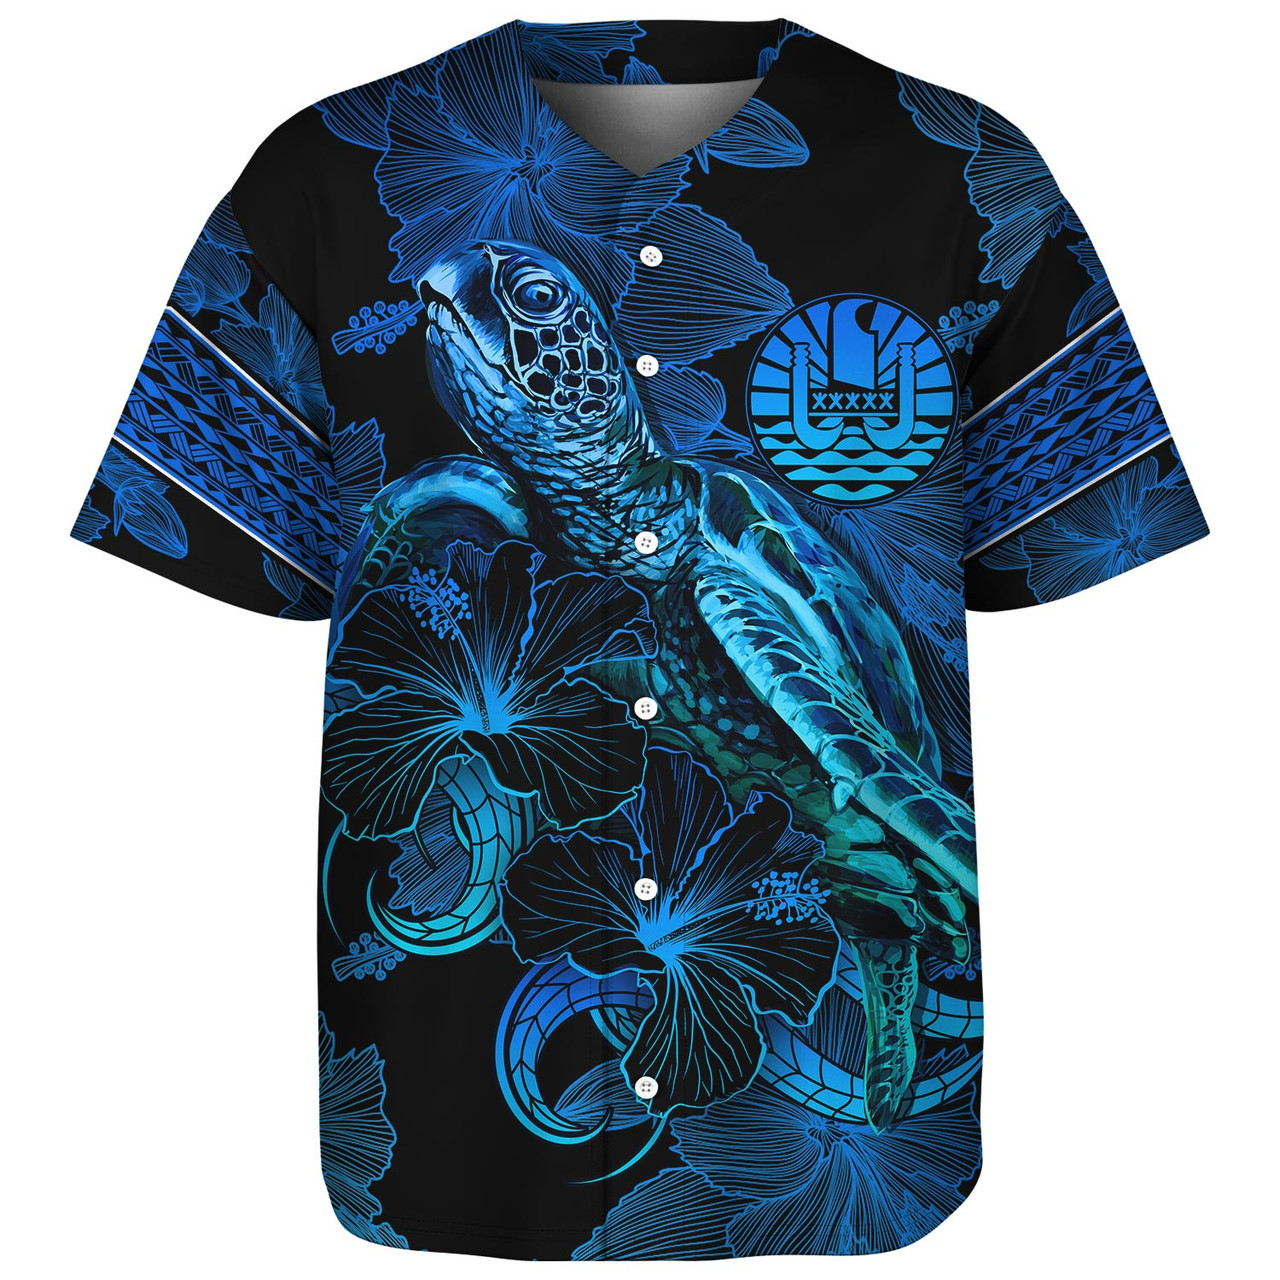 French Polynesia Baseball Shirt Sea Turtle With Blooming Hibiscus Flowers Tribal Blue